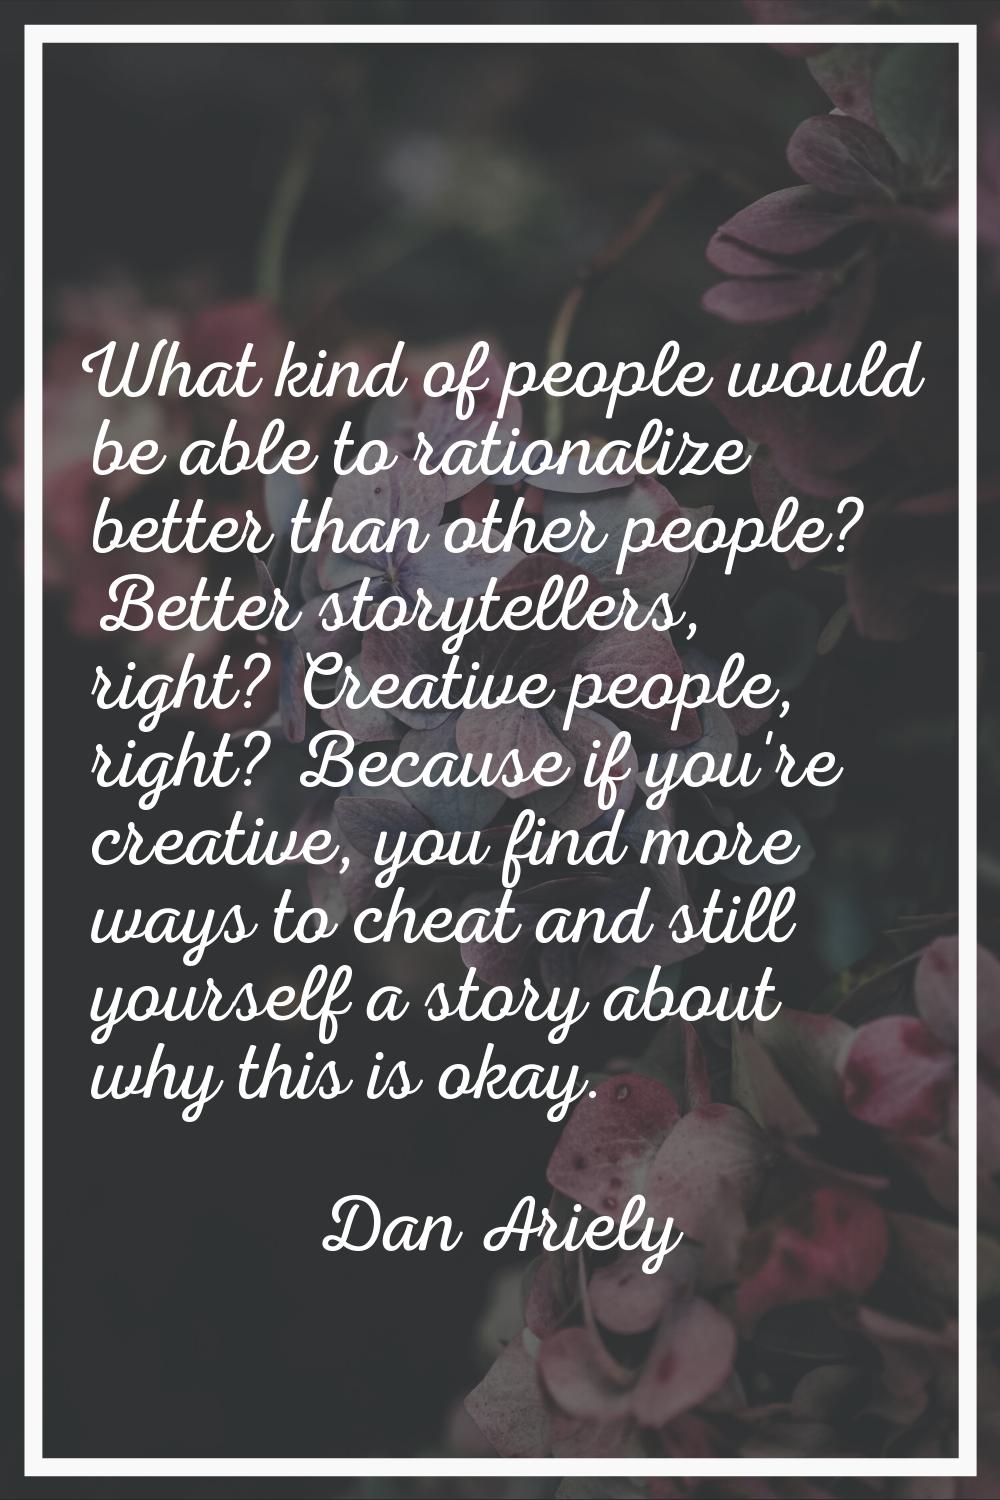 What kind of people would be able to rationalize better than other people? Better storytellers, rig